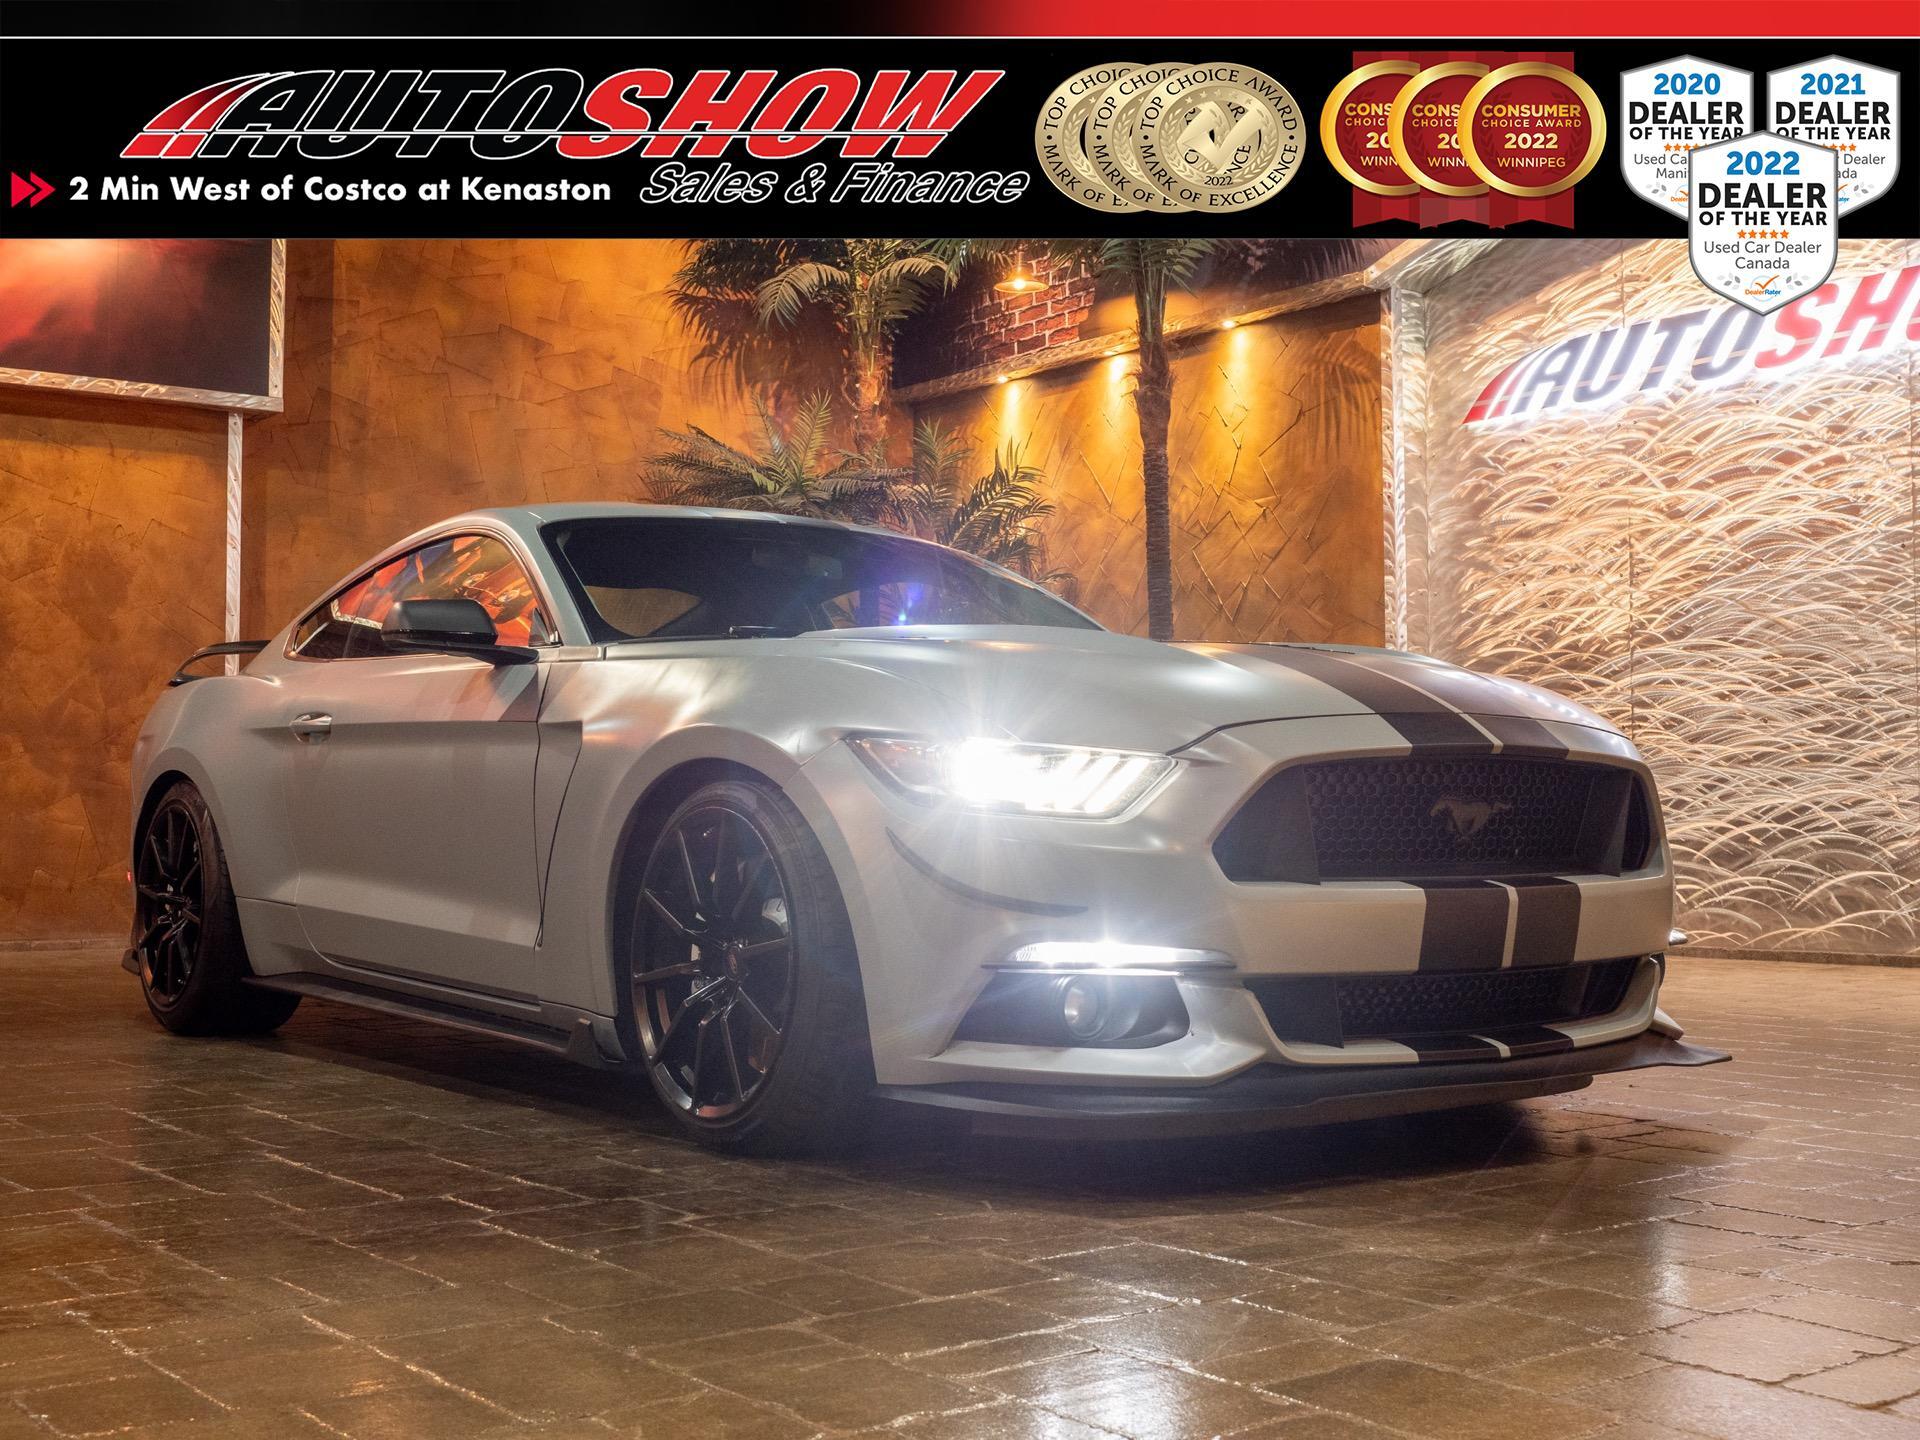 2015 Ford Mustang Shelby Clone - Perf Pkg, Brembos, Nav, Big Mods!